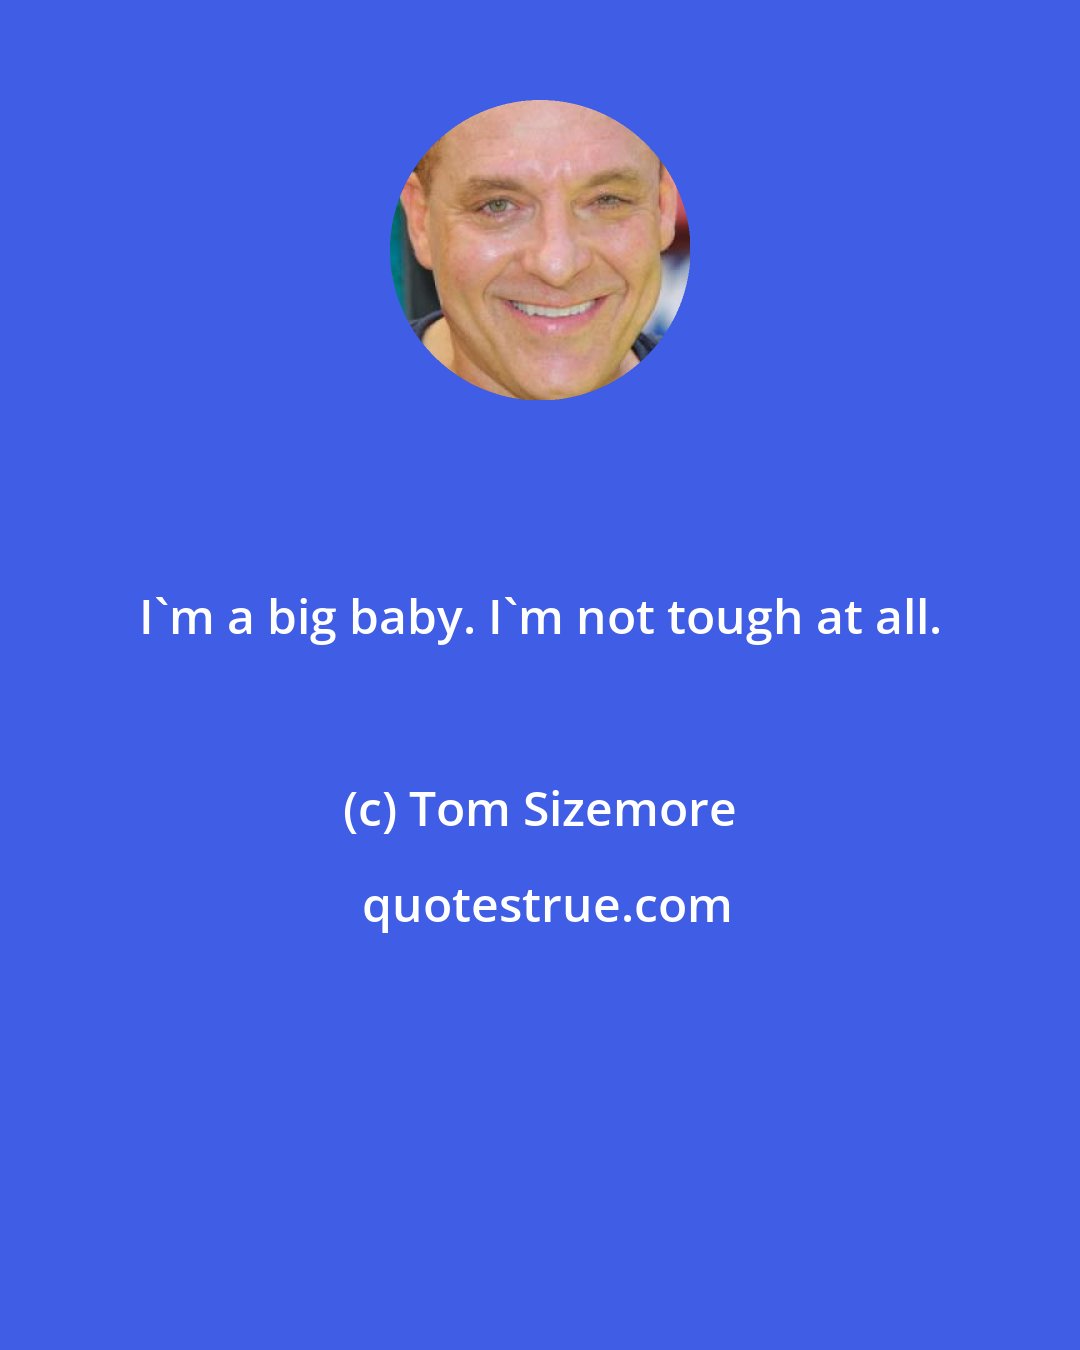 Tom Sizemore: I'm a big baby. I'm not tough at all.